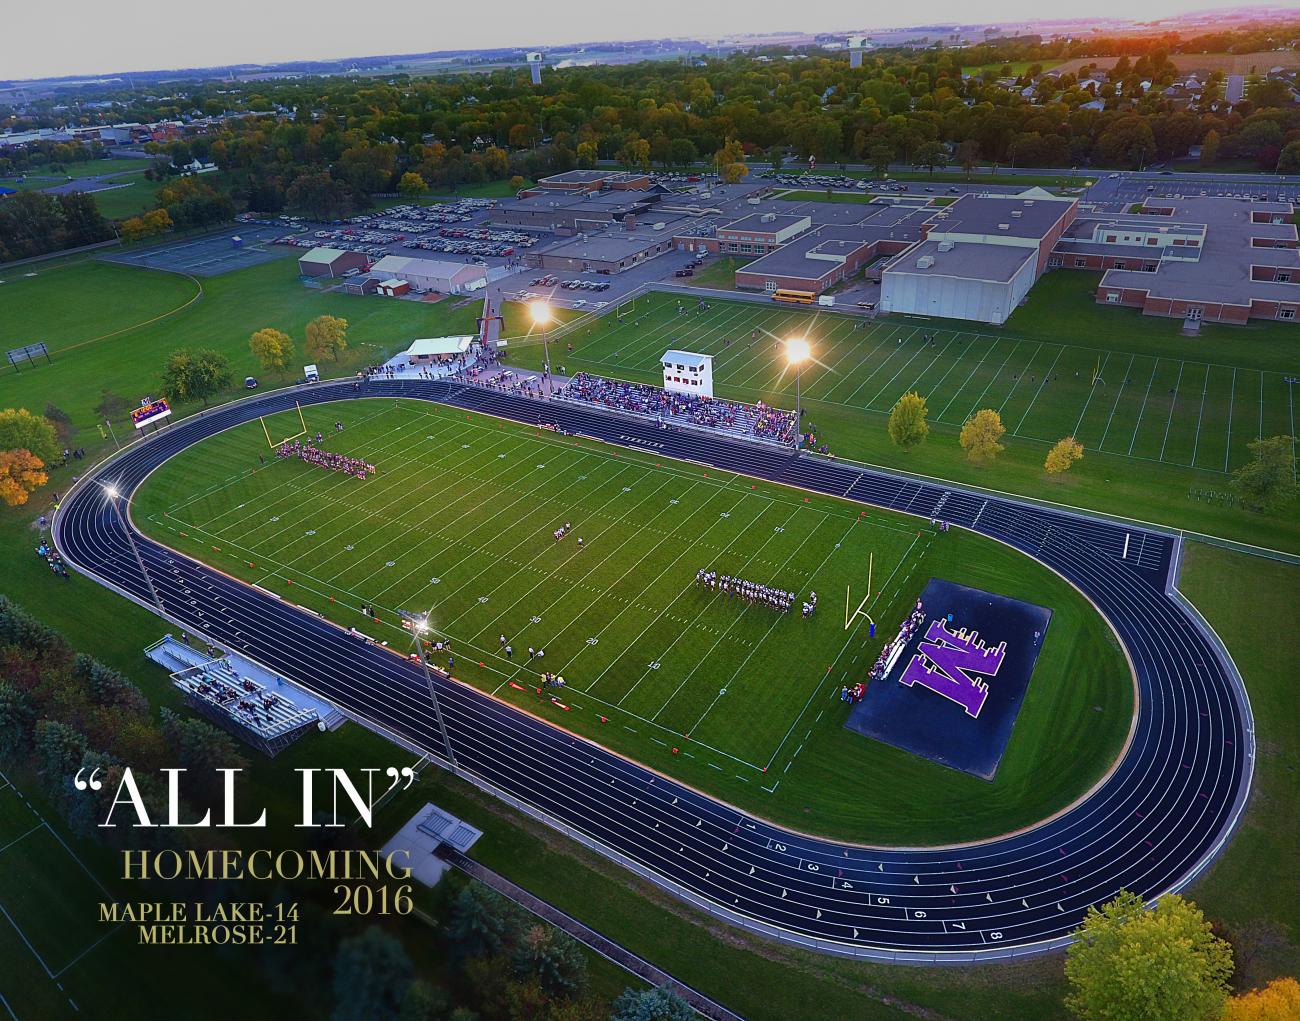 Drone Image of Football Field